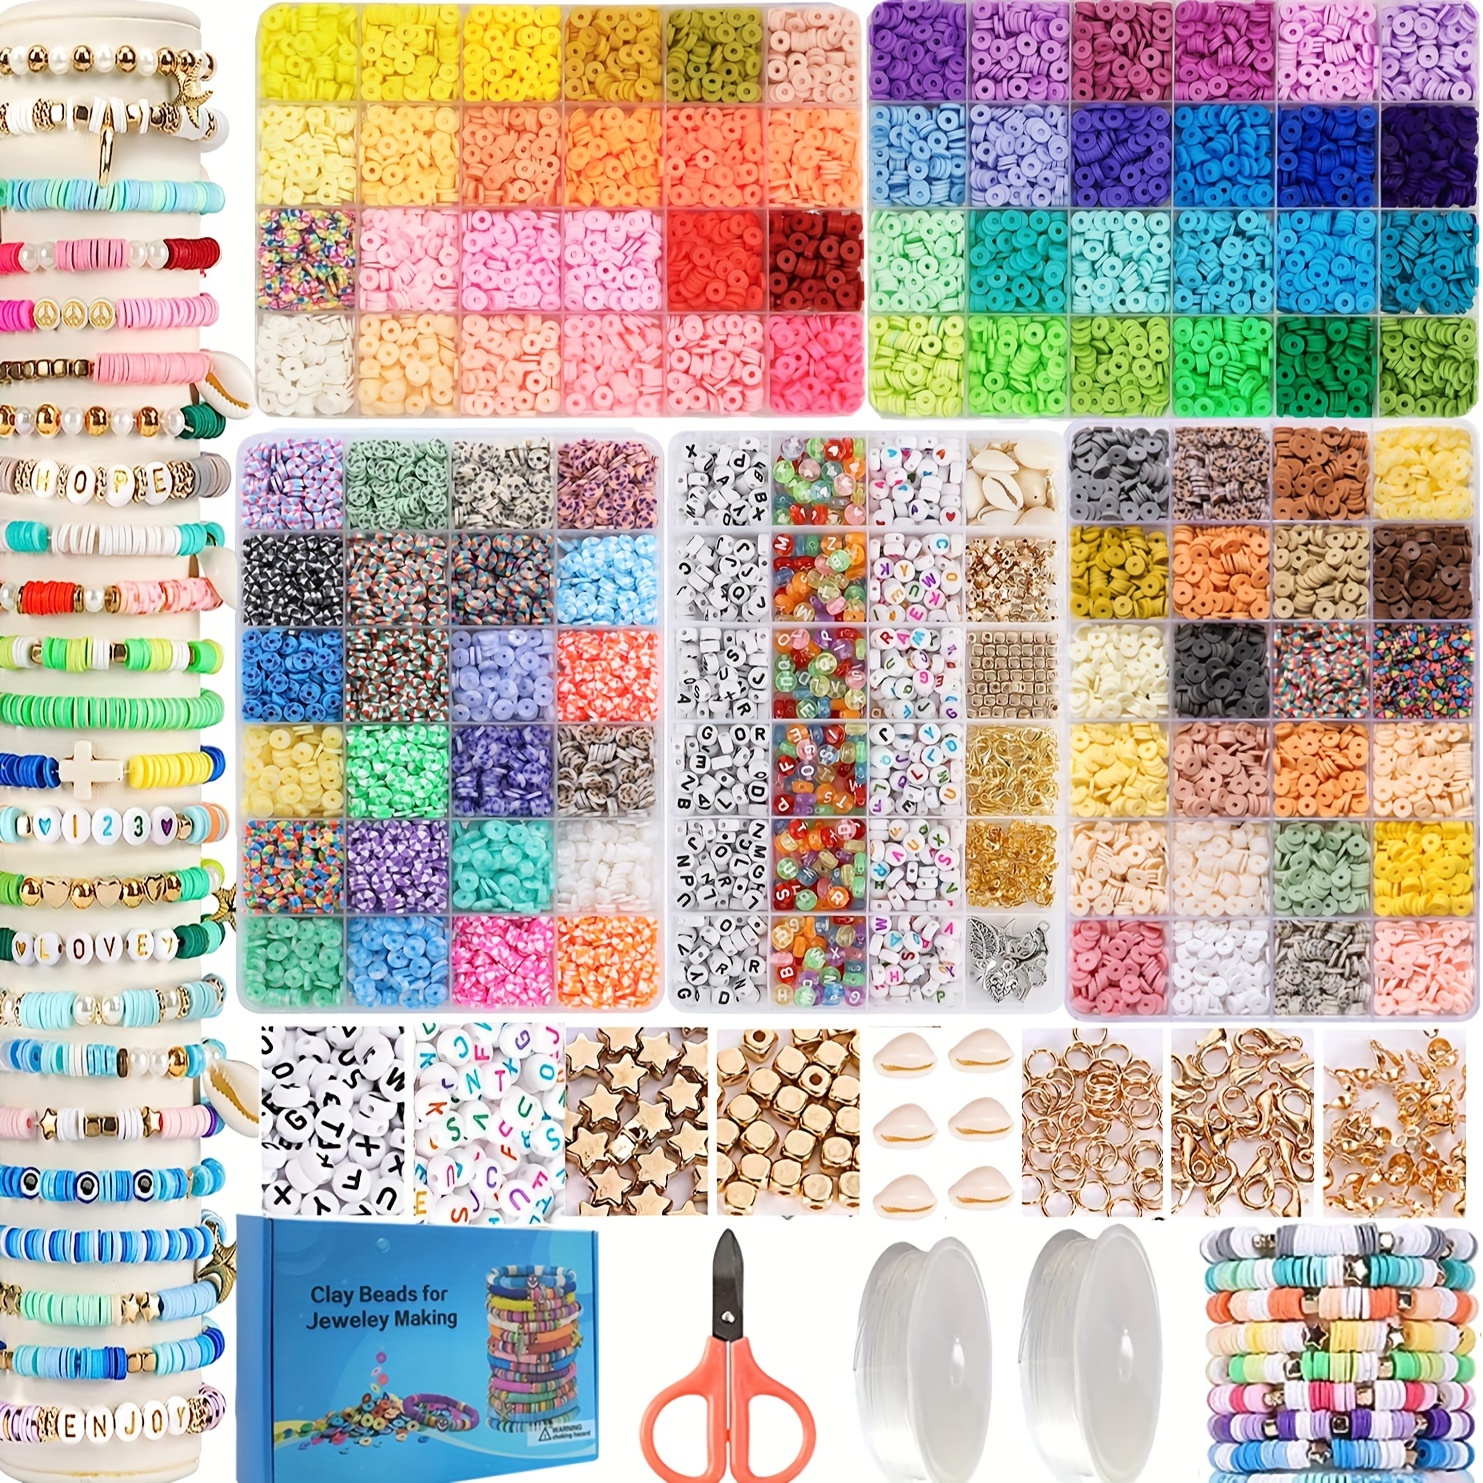 6800 CLAY BEADS Bracelet Making Kit 24 Colors Spacer Flat Beads